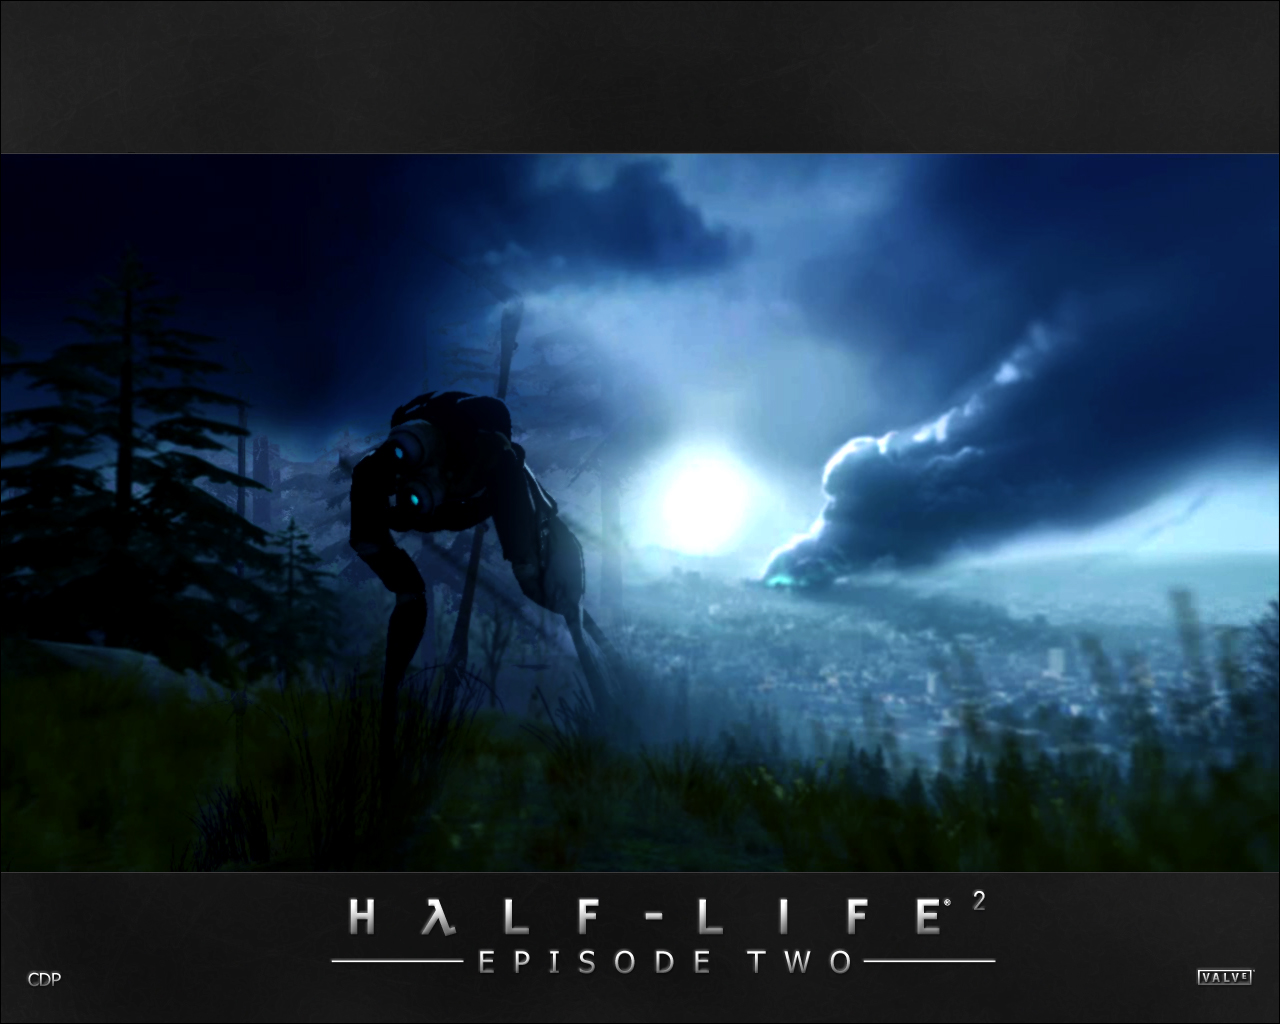 General 1280x1024 Half-Life video games Half-Life 2 Combine PC gaming Valve Corporation science fiction video game art Half-Life 2: Episode Two